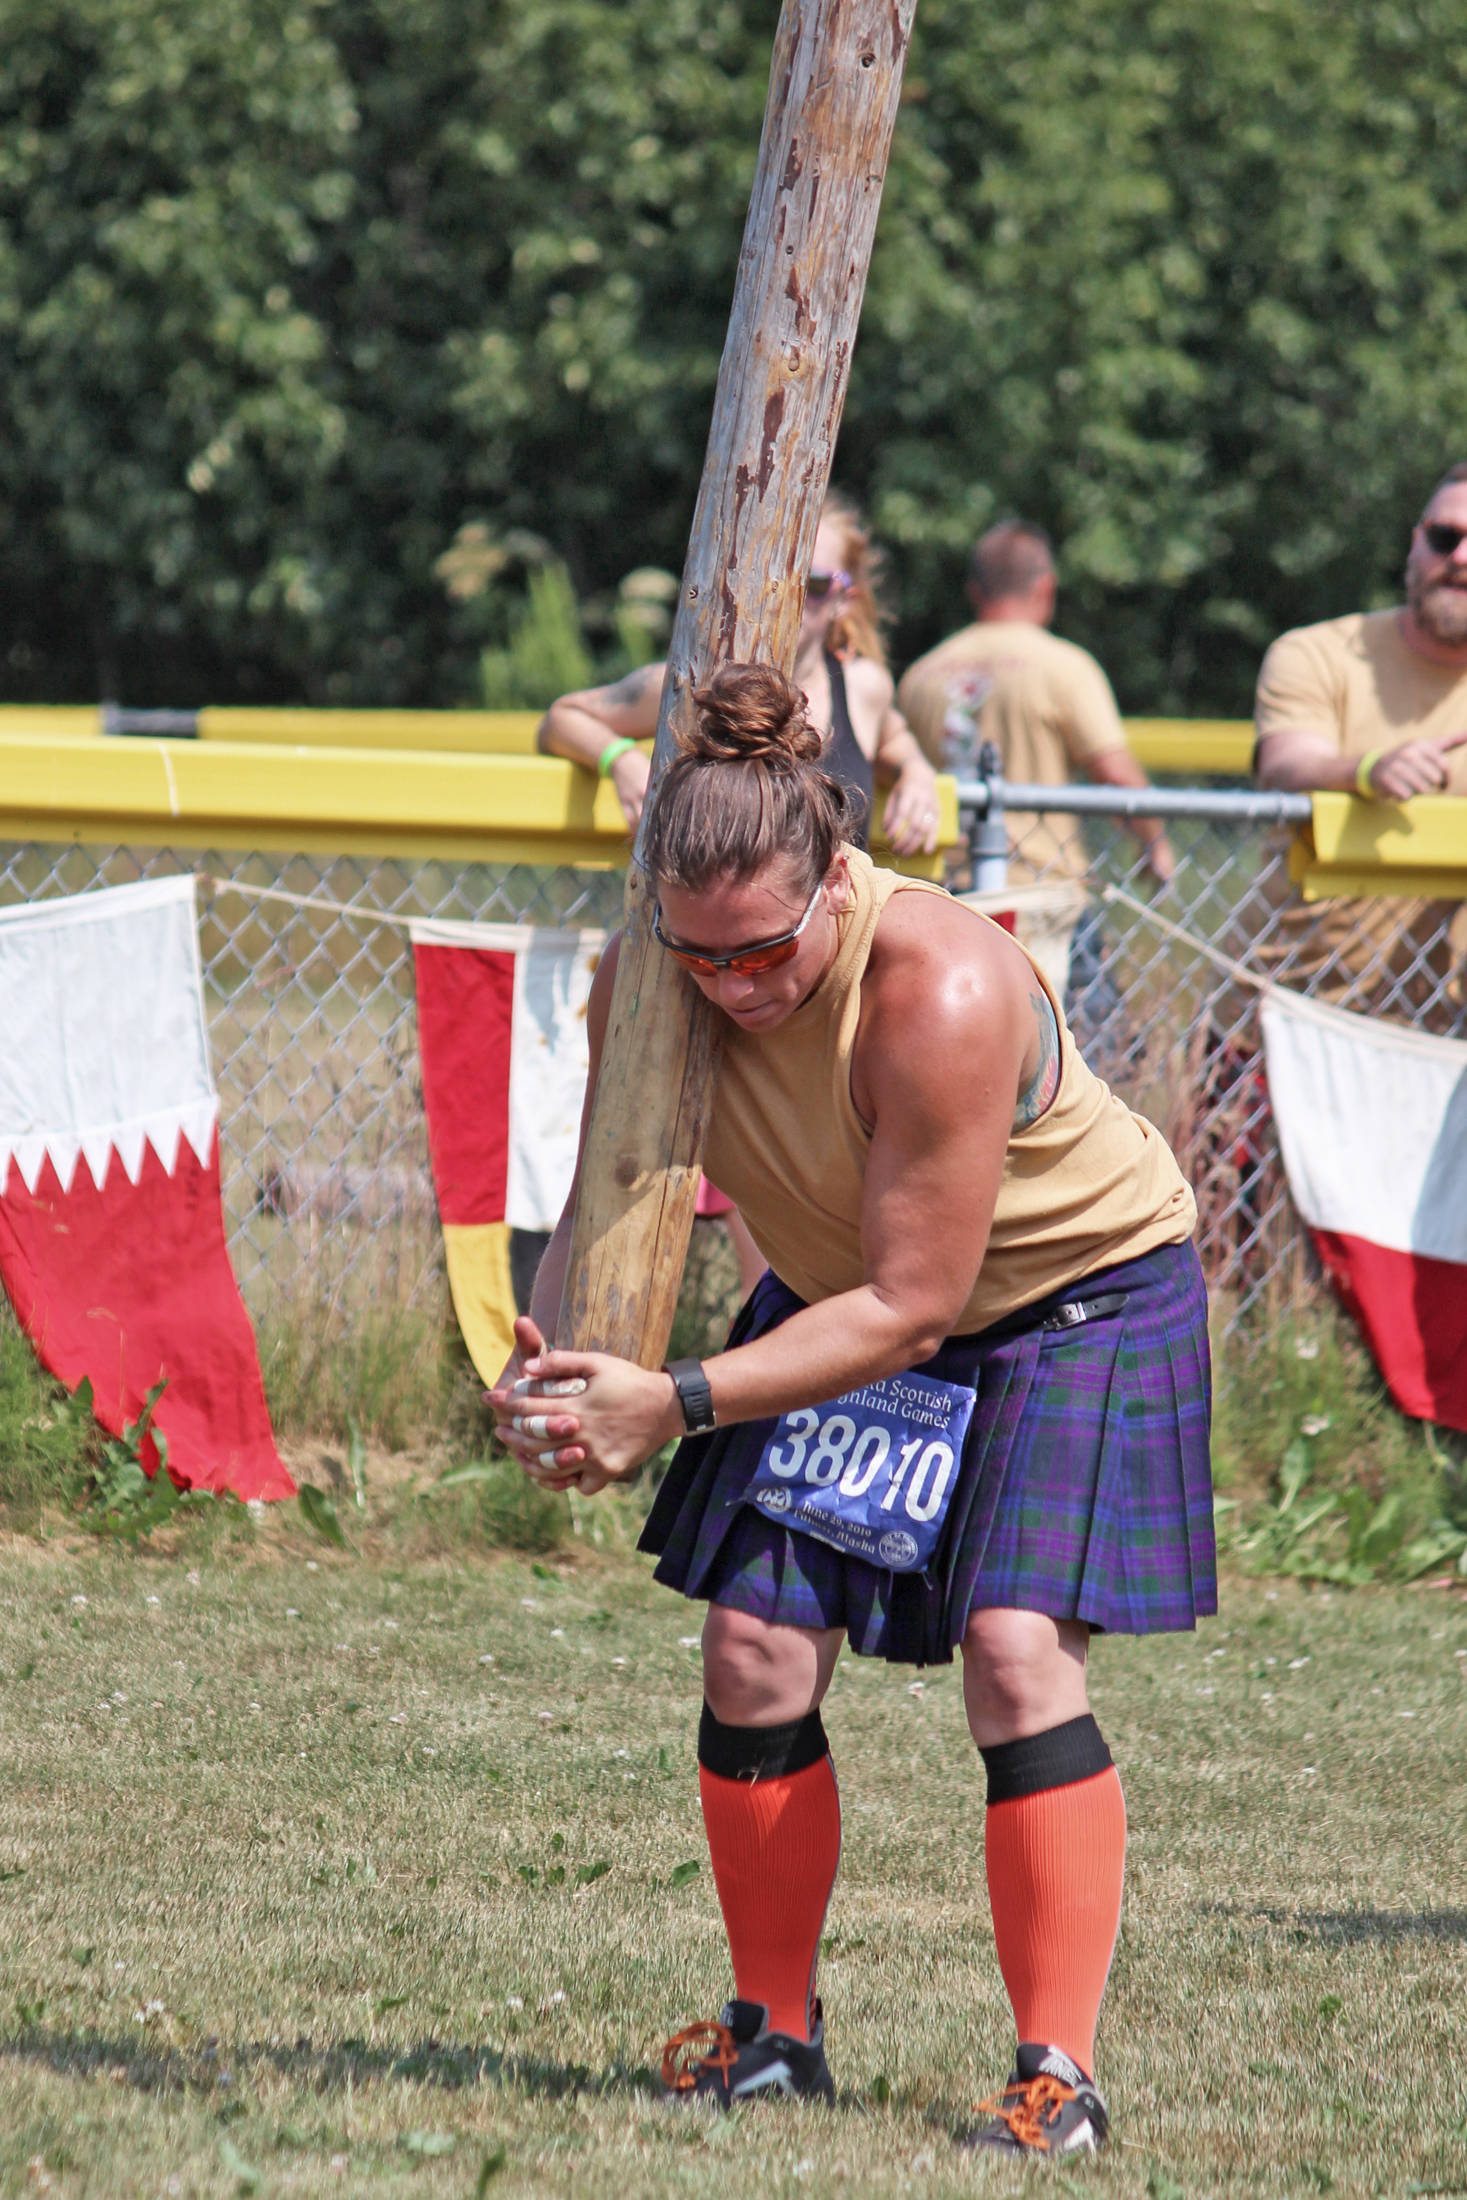 Chrystal Rubert of Washington State picks up a caber and prepares to throw it during the women’s caber toss event.